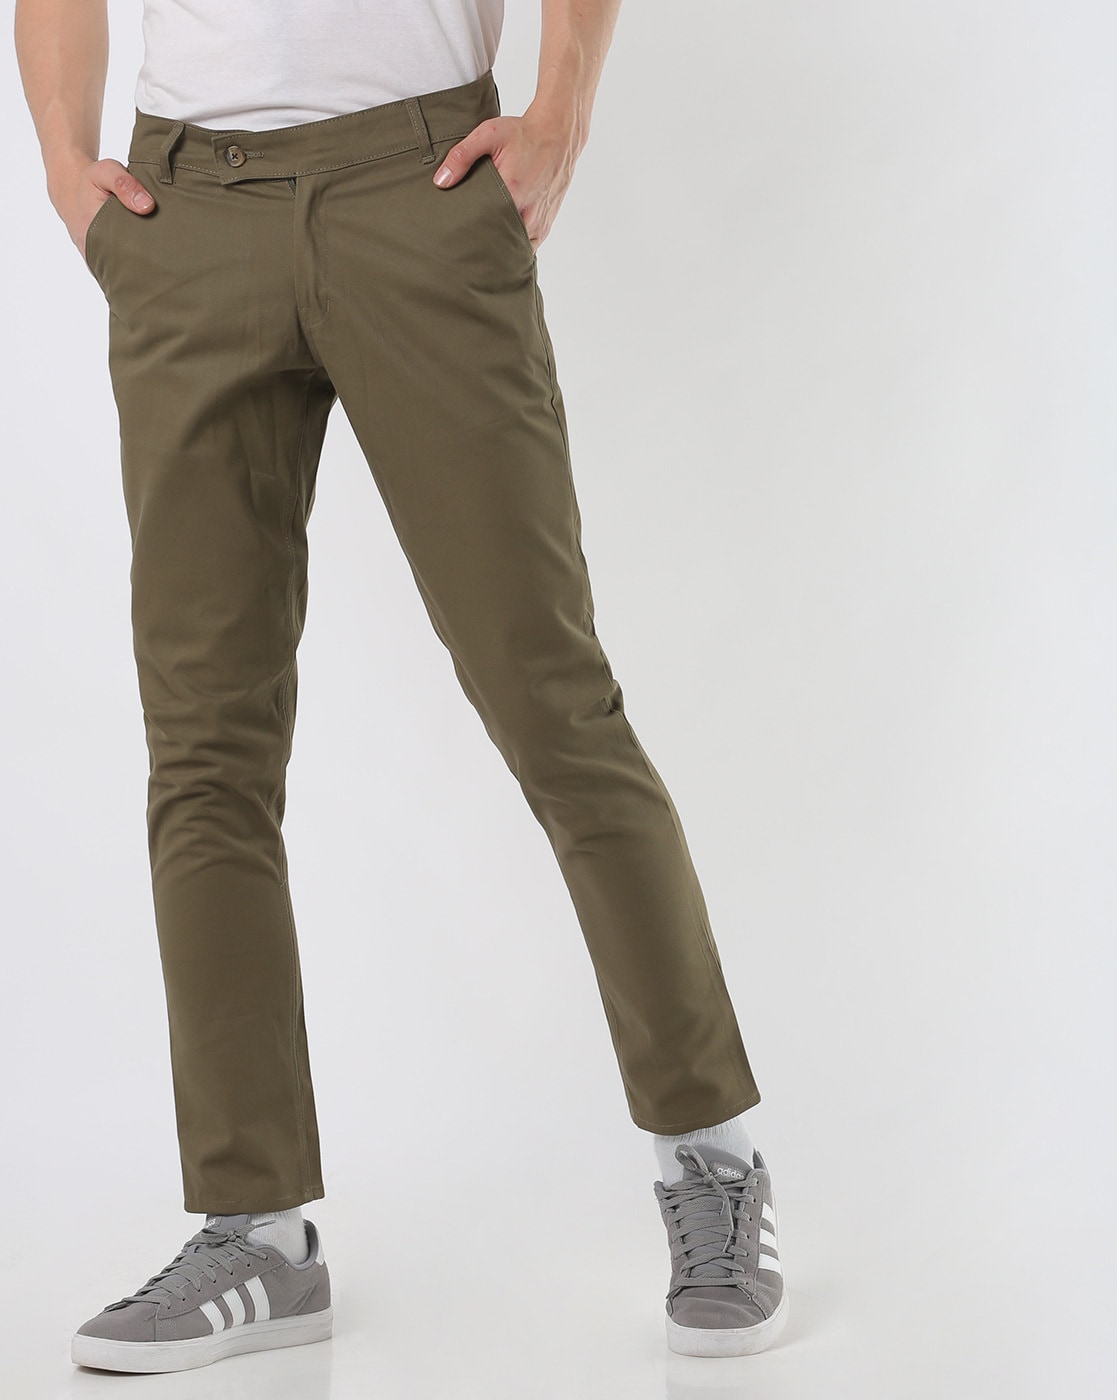 Apply Coupon Hubberholme Men Slim Fit Casual Comfortable Stretchable  Trousers Rs 234  Amazon